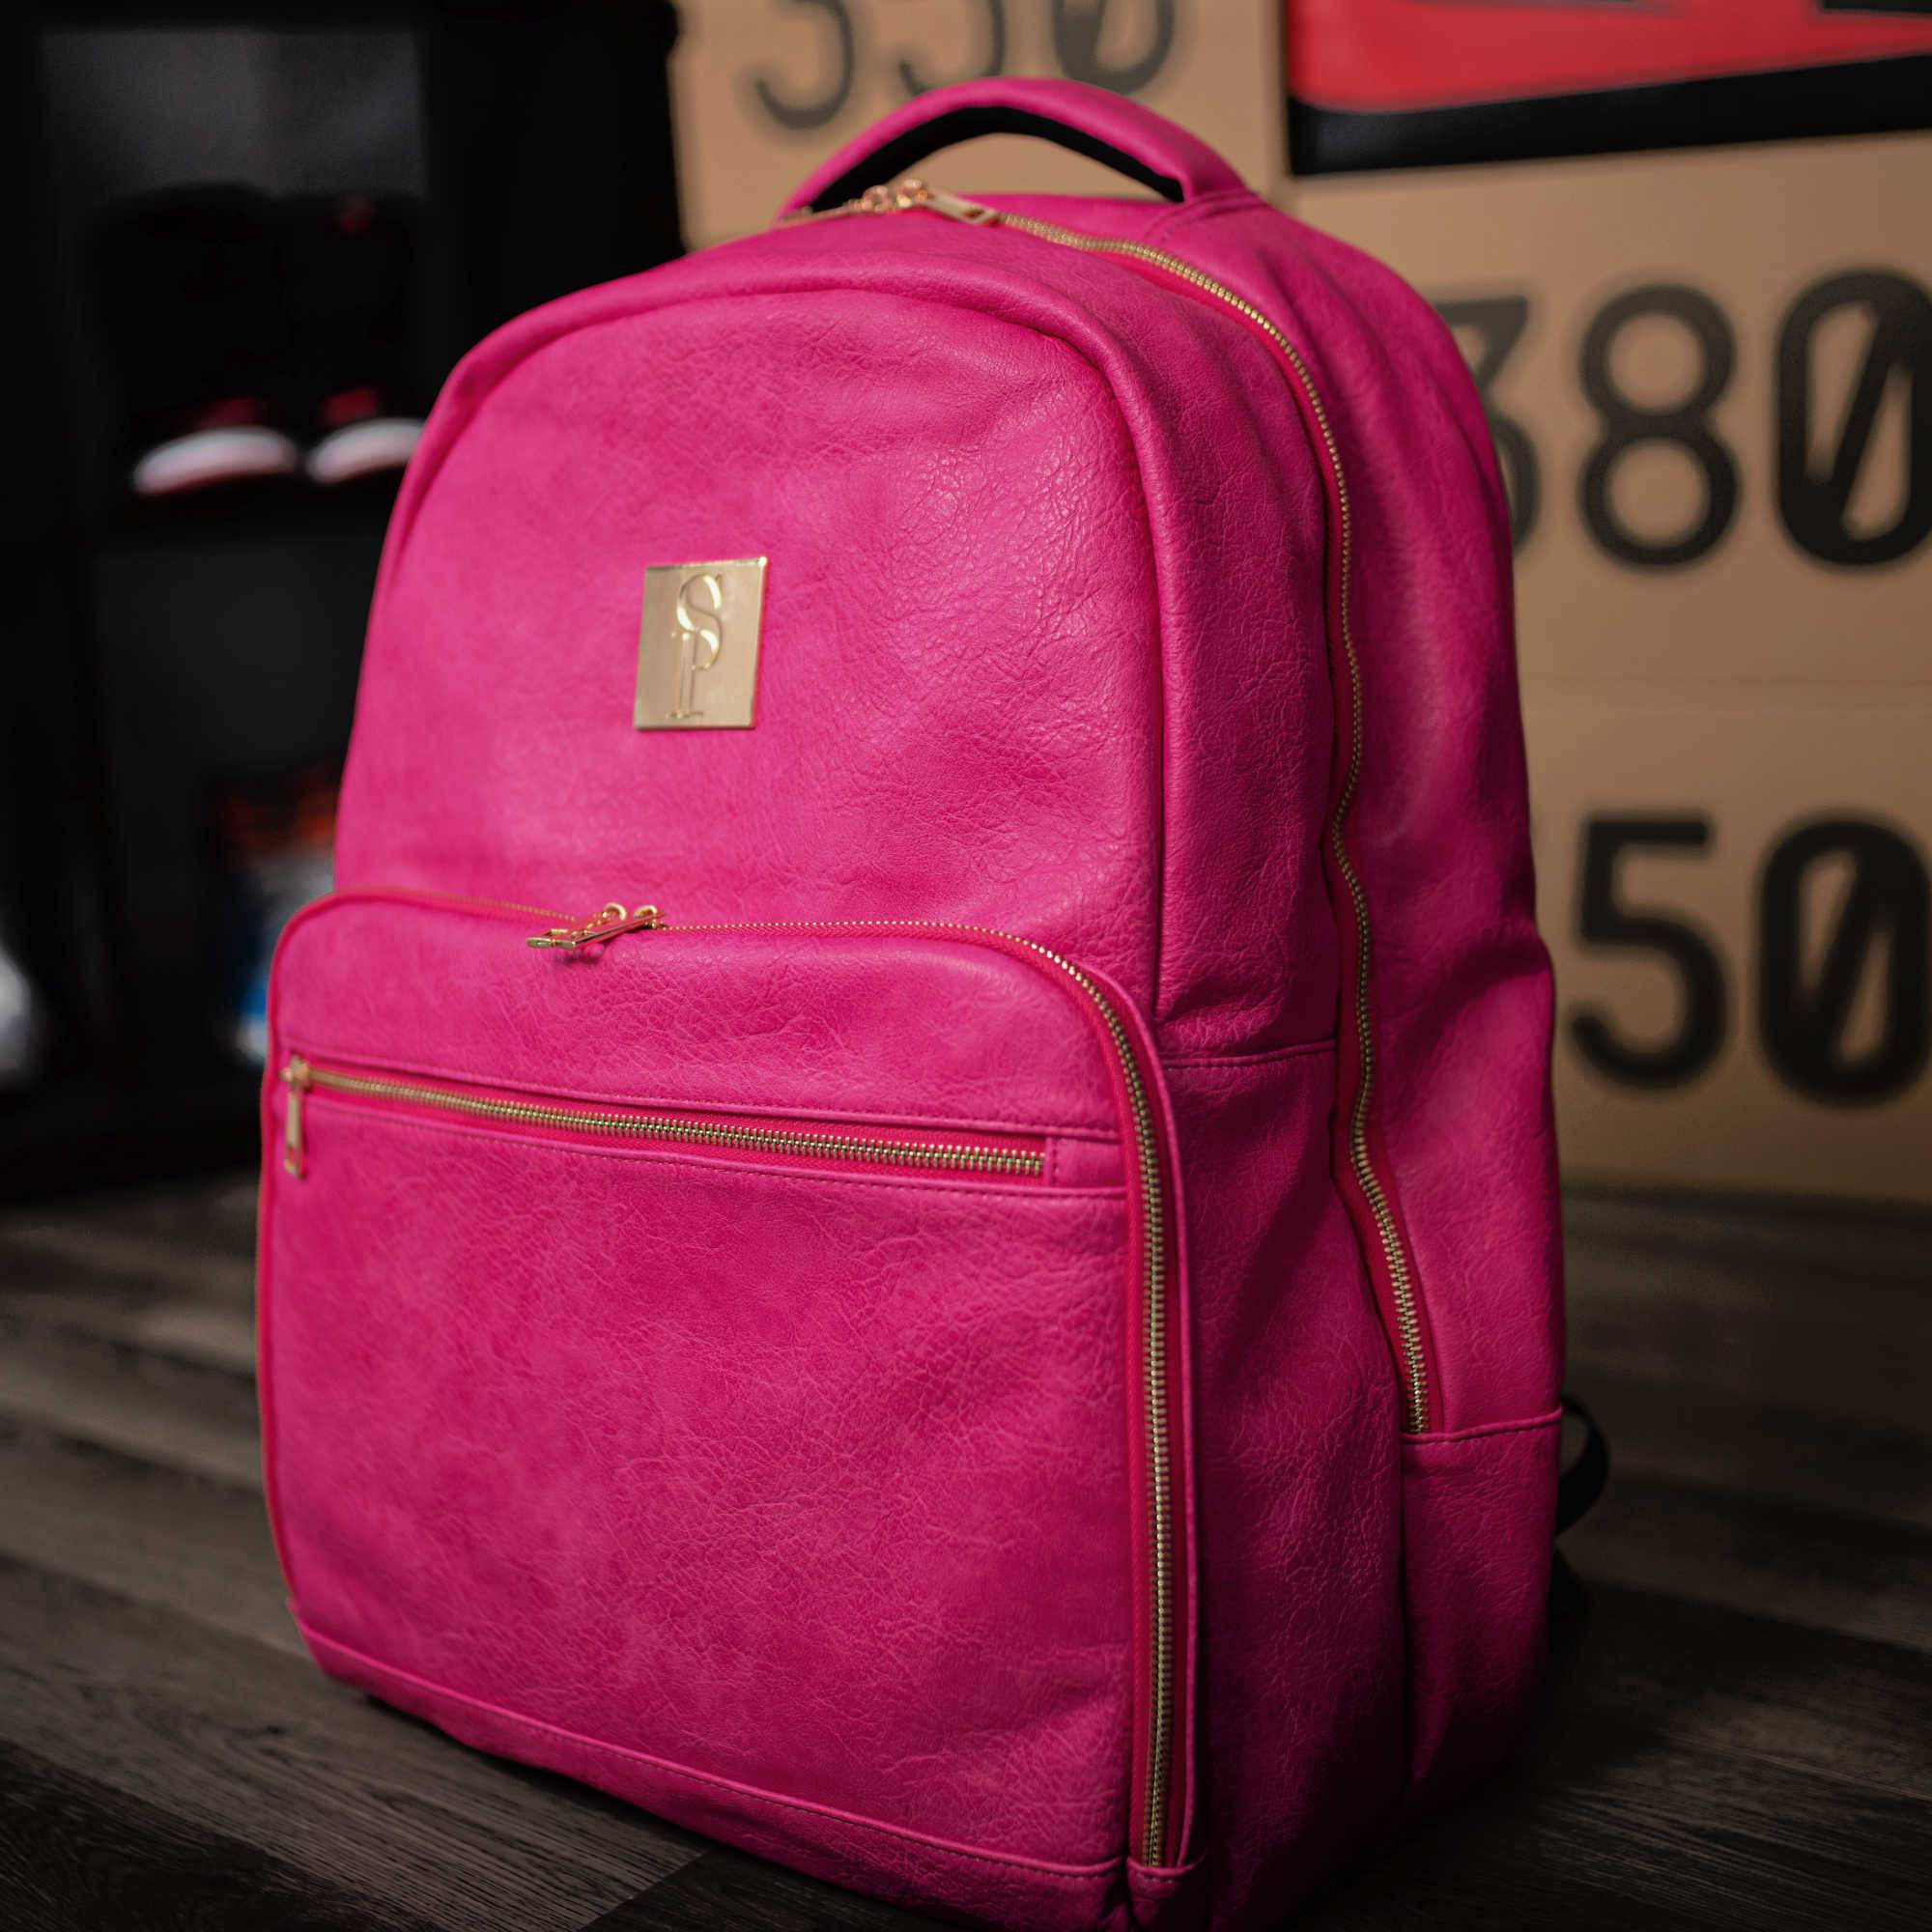 Pink Tumbled Leather Commuter Bag (Only 100 Made) - Sole Premise